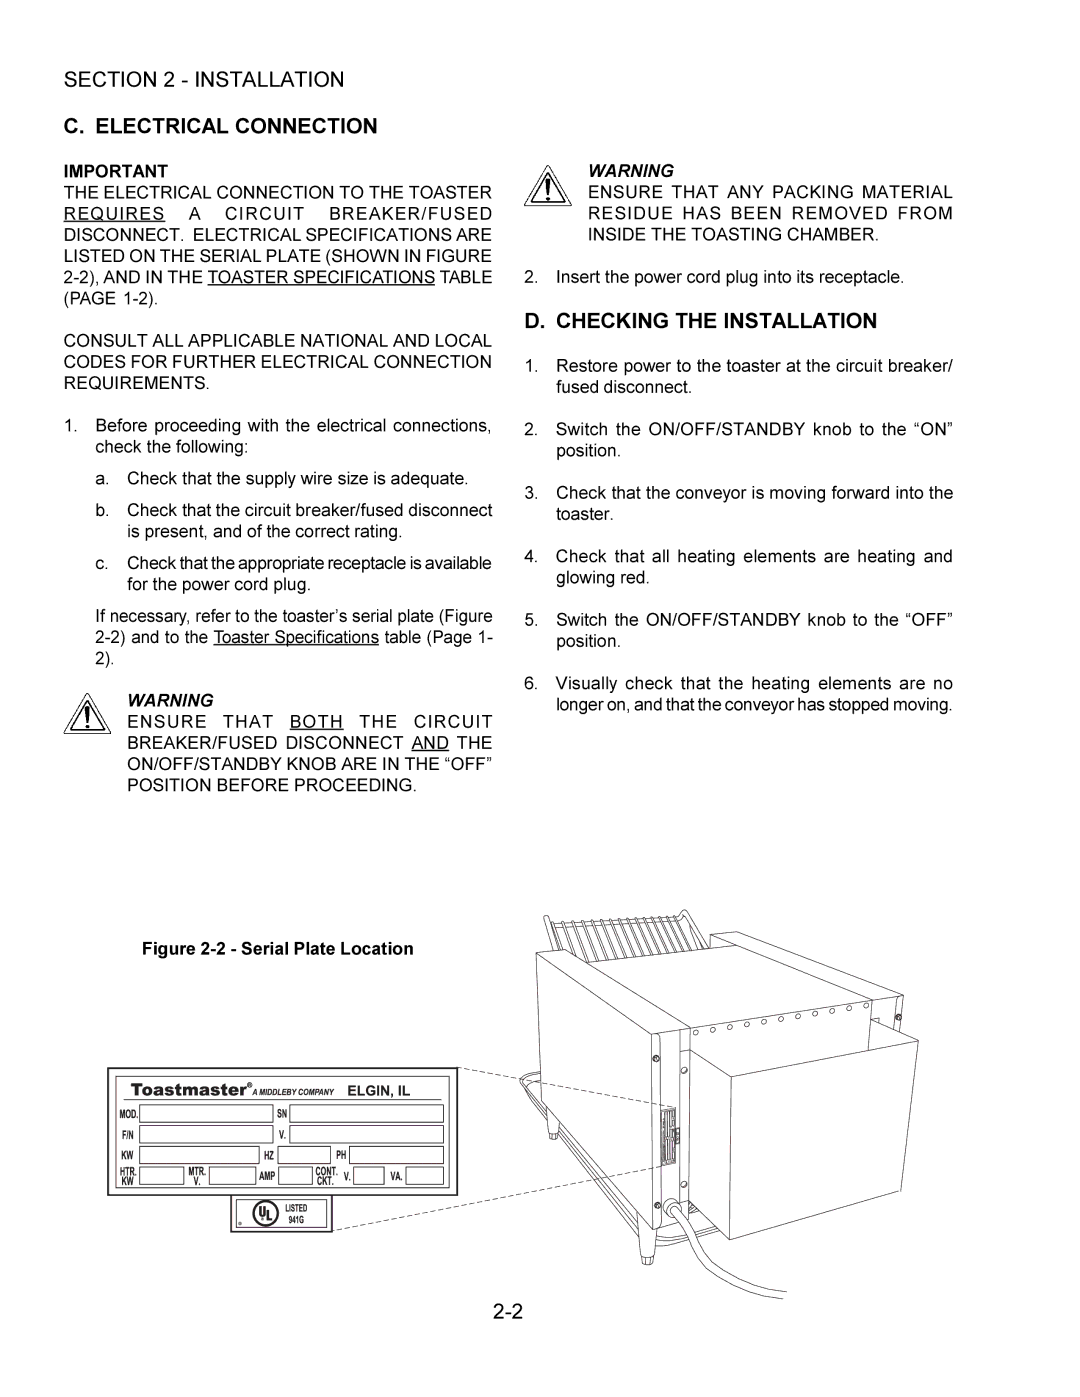 Toastmaster TW240, TW208, TB240, TB208 installation manual Electrical Connection, Checking the Installation 